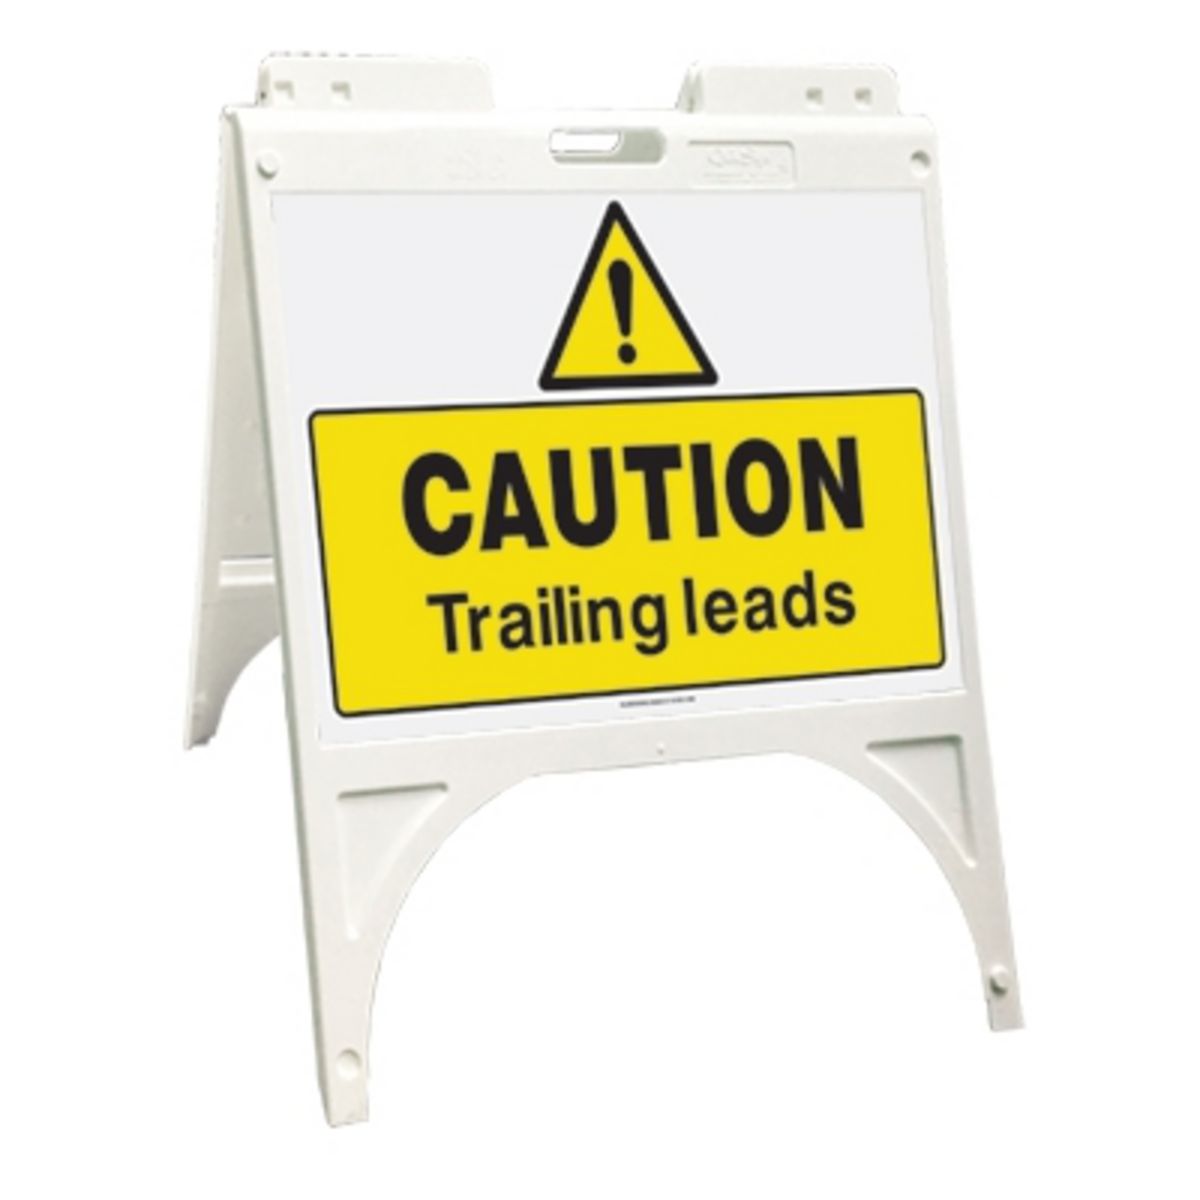 QuikSign - Caution Trailing Leads.jpg